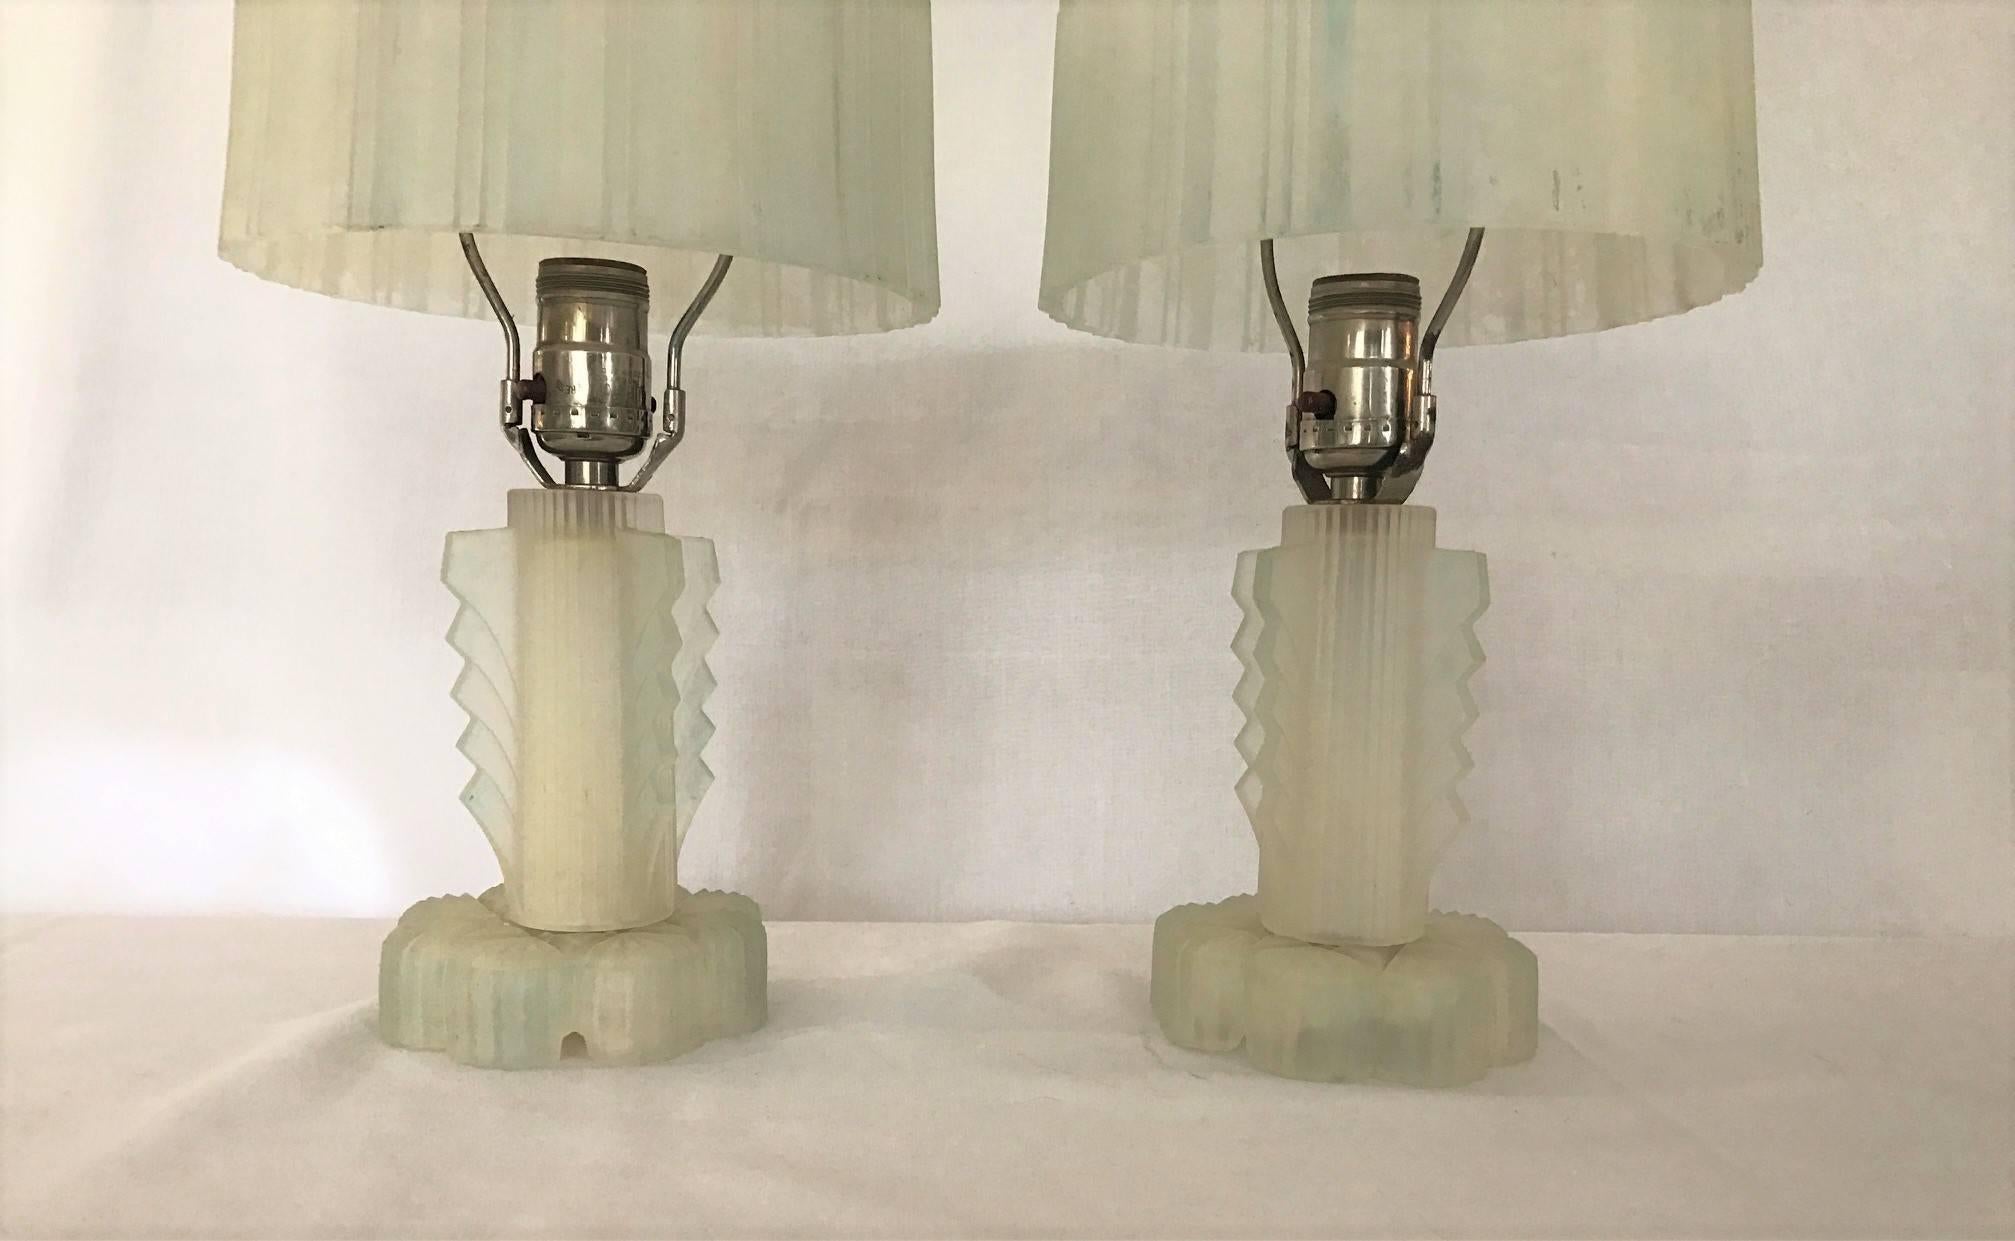 On Sale Now!  Streamlined and Clean Modern Look.  A Pair of Stunning pair of Art Deco Lalique Style Beautiful Frosted All Glass Lamps Gorgeous Nickel Finials with a touch of blue perimeter. Modern Flare.  Streamlined and Clean. 